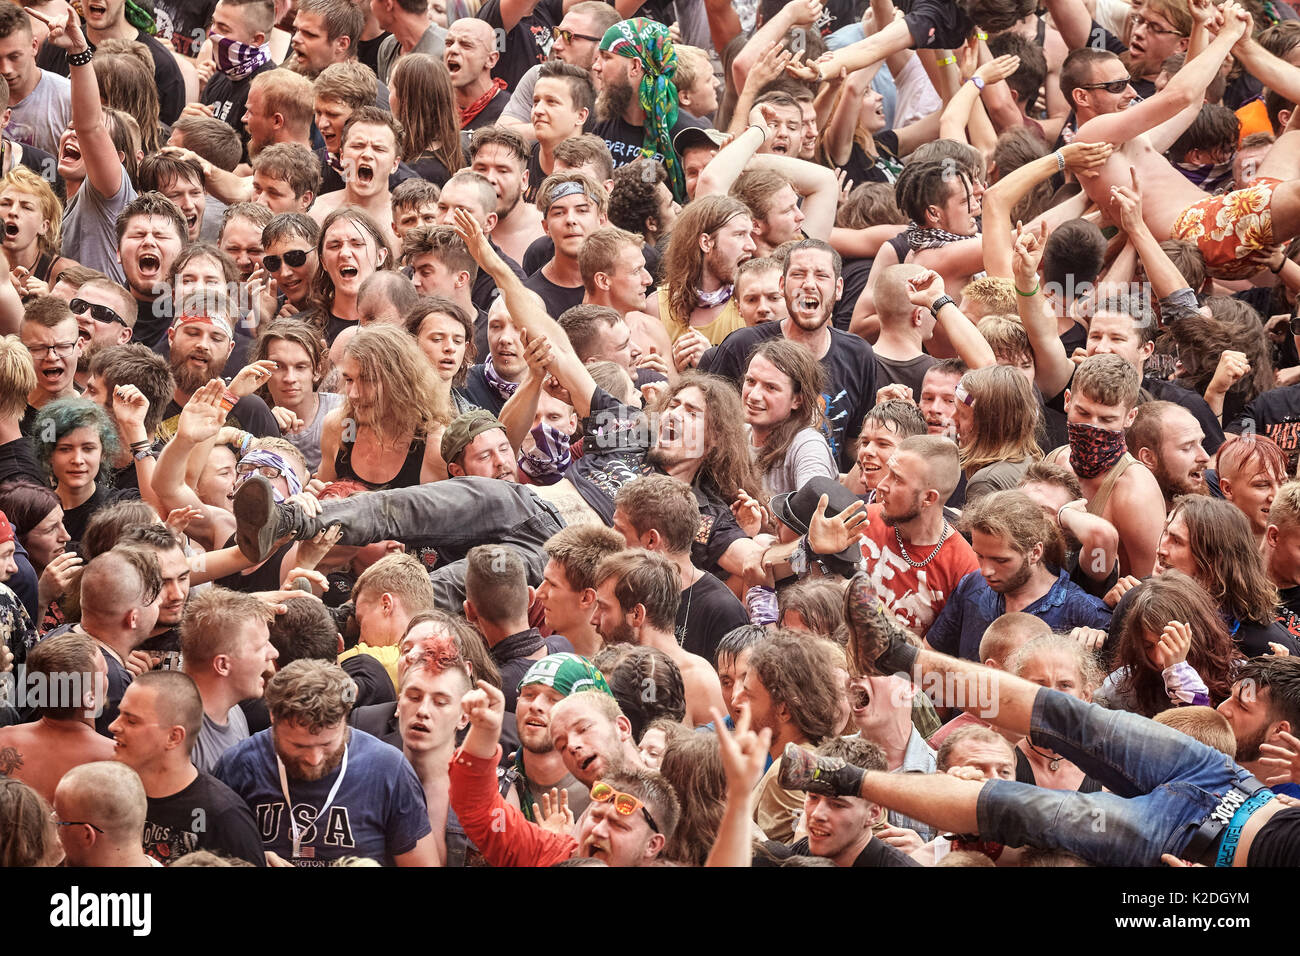 Kostrzyn, Poland - August 05, 2017: People having fun at a concert during the 23rd Woodstock Festival Poland. Stock Photo